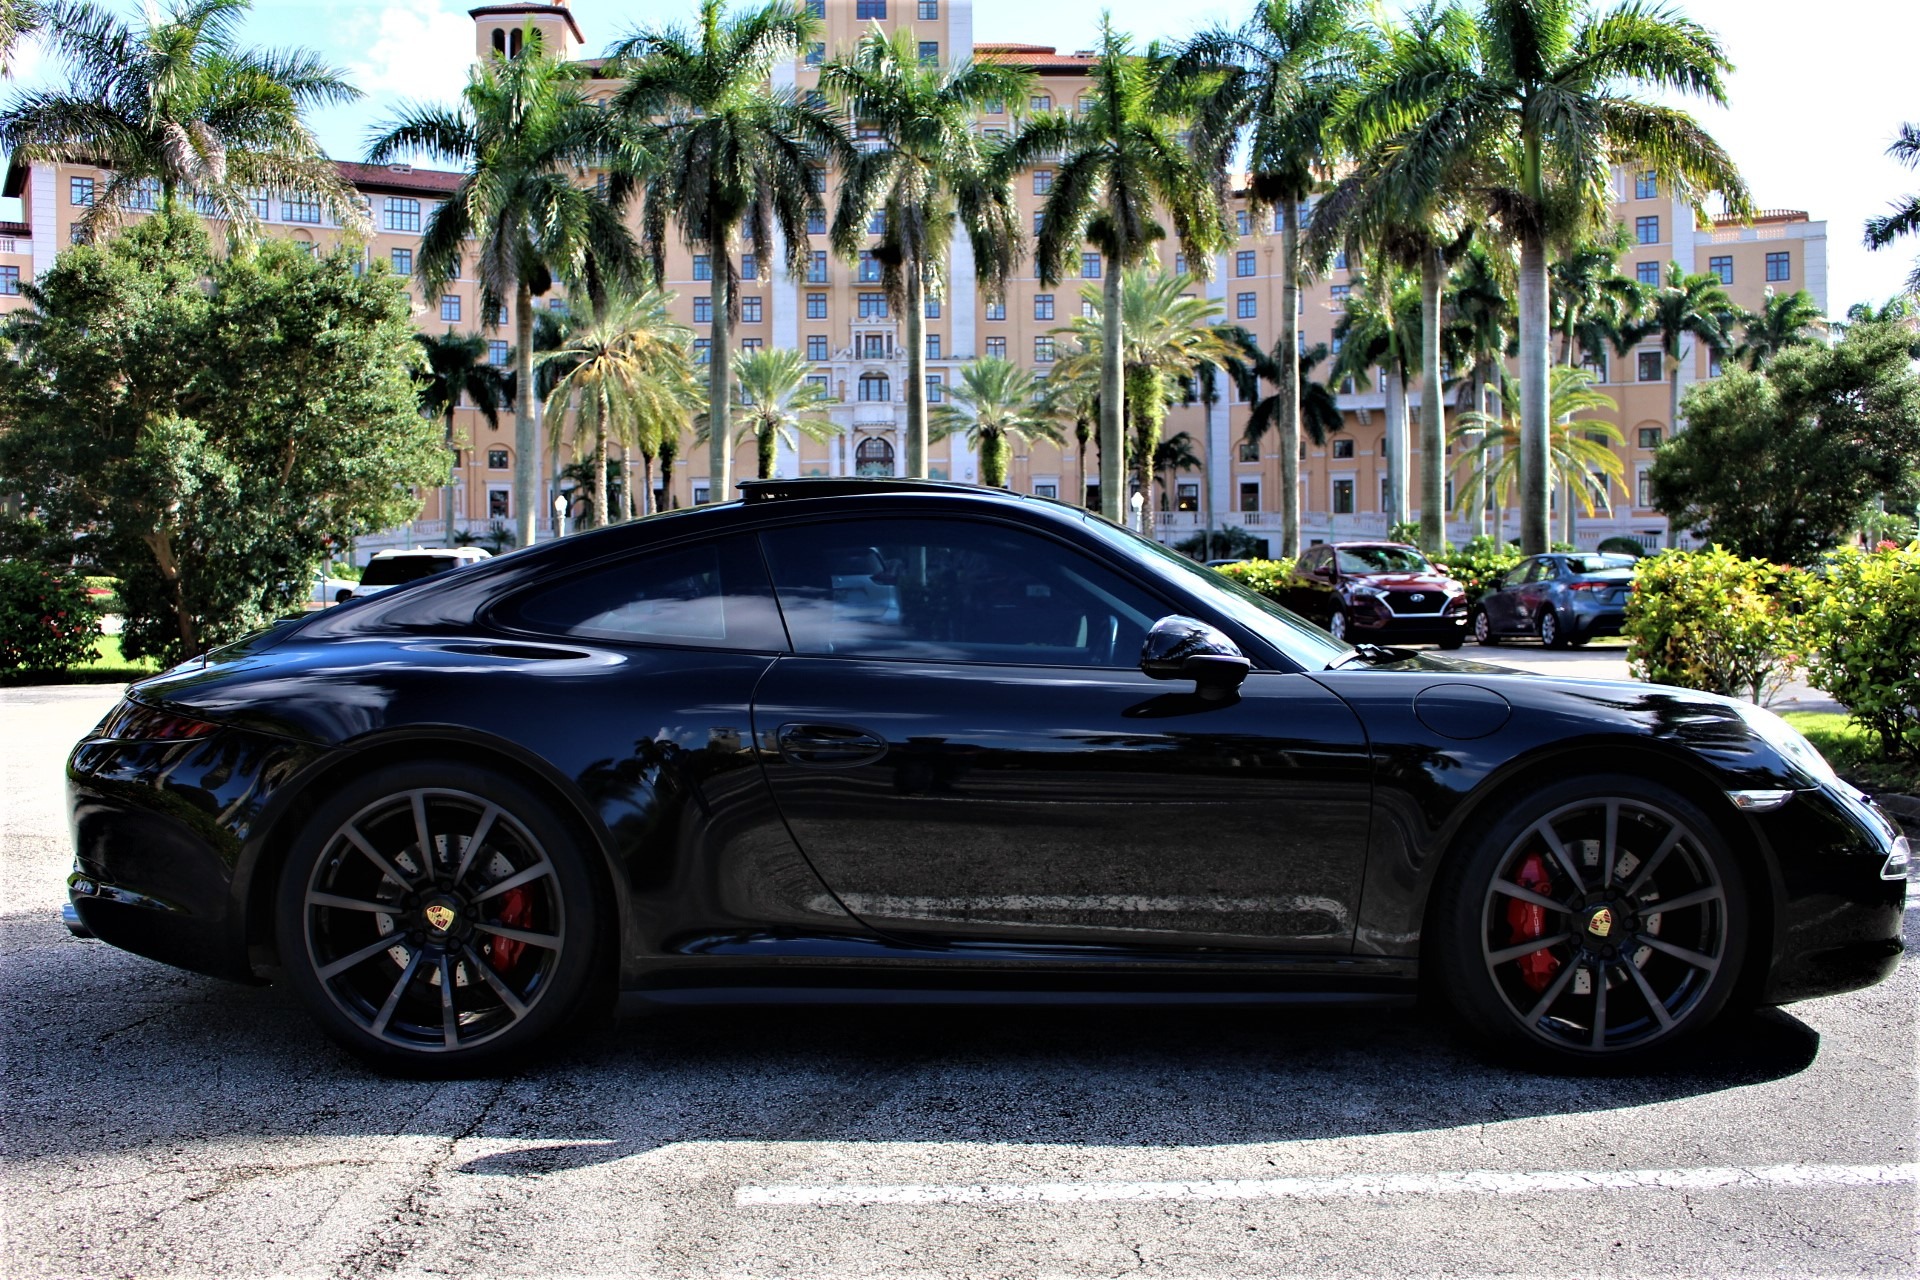 Used 2013 Porsche 911 Carrera 4S for sale Sold at The Gables Sports Cars in Miami FL 33146 2